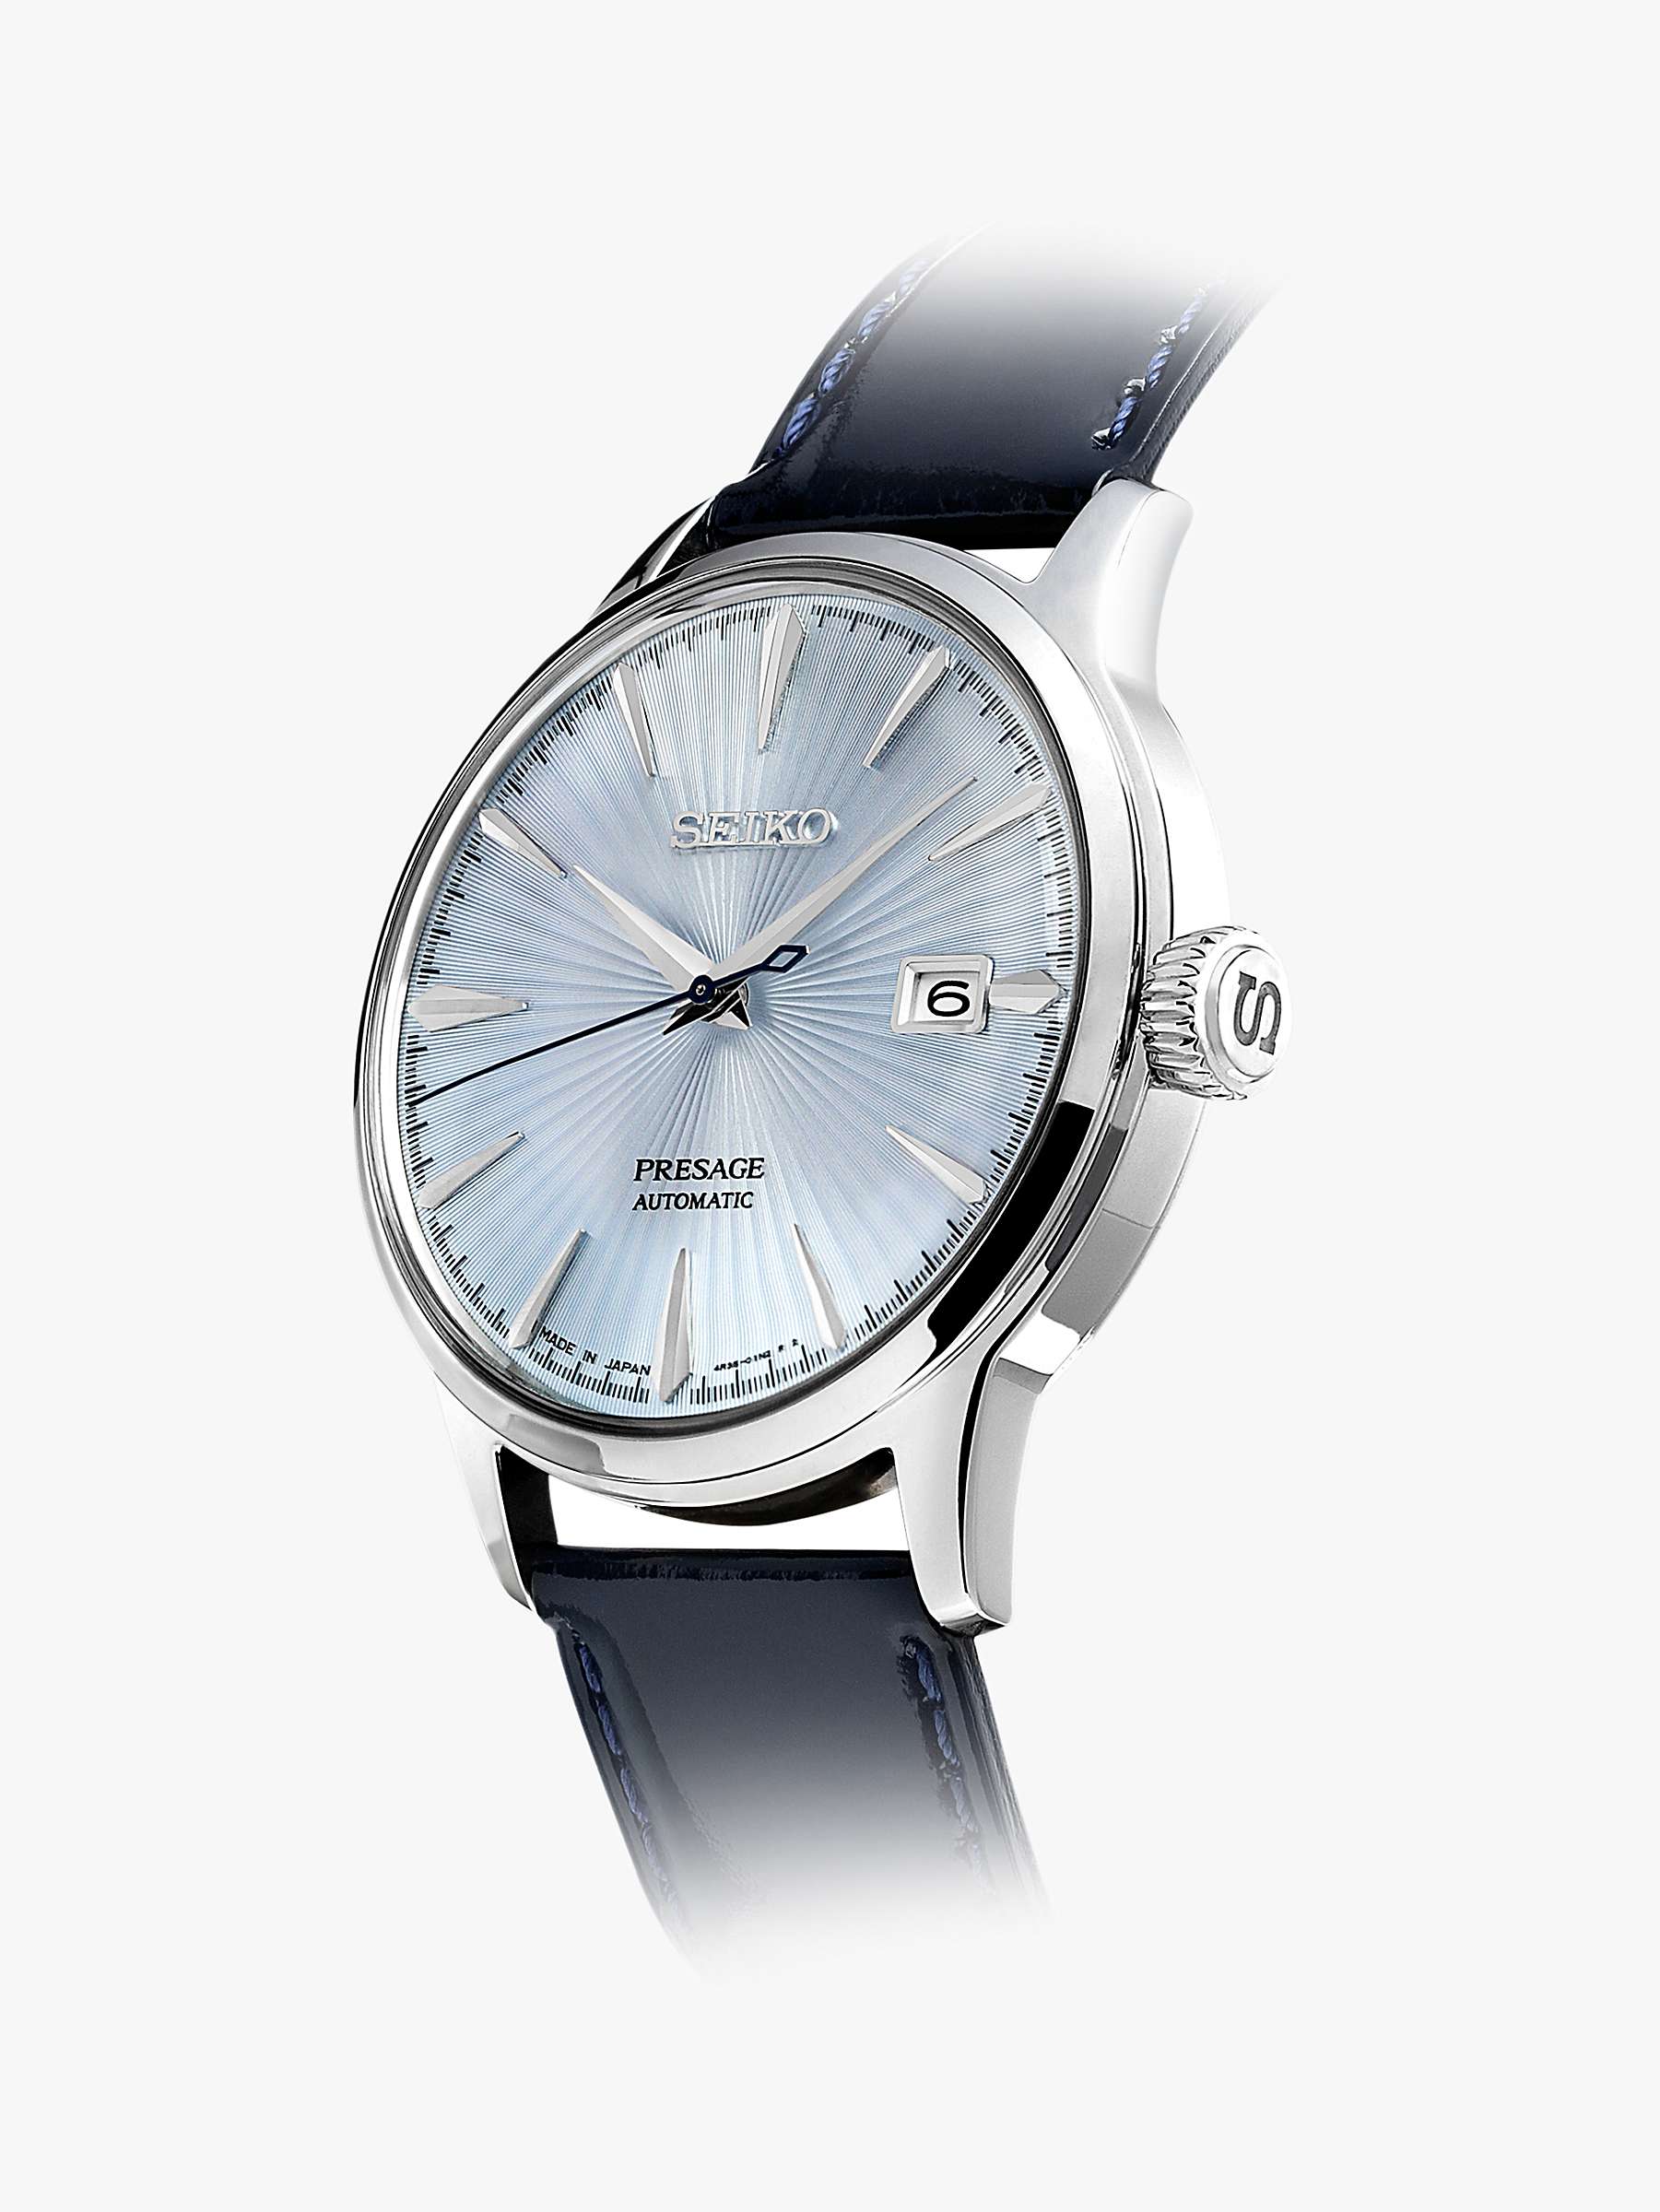 Buy Seiko Men's Presage Automatic Date Leather Strap Watch Online at johnlewis.com